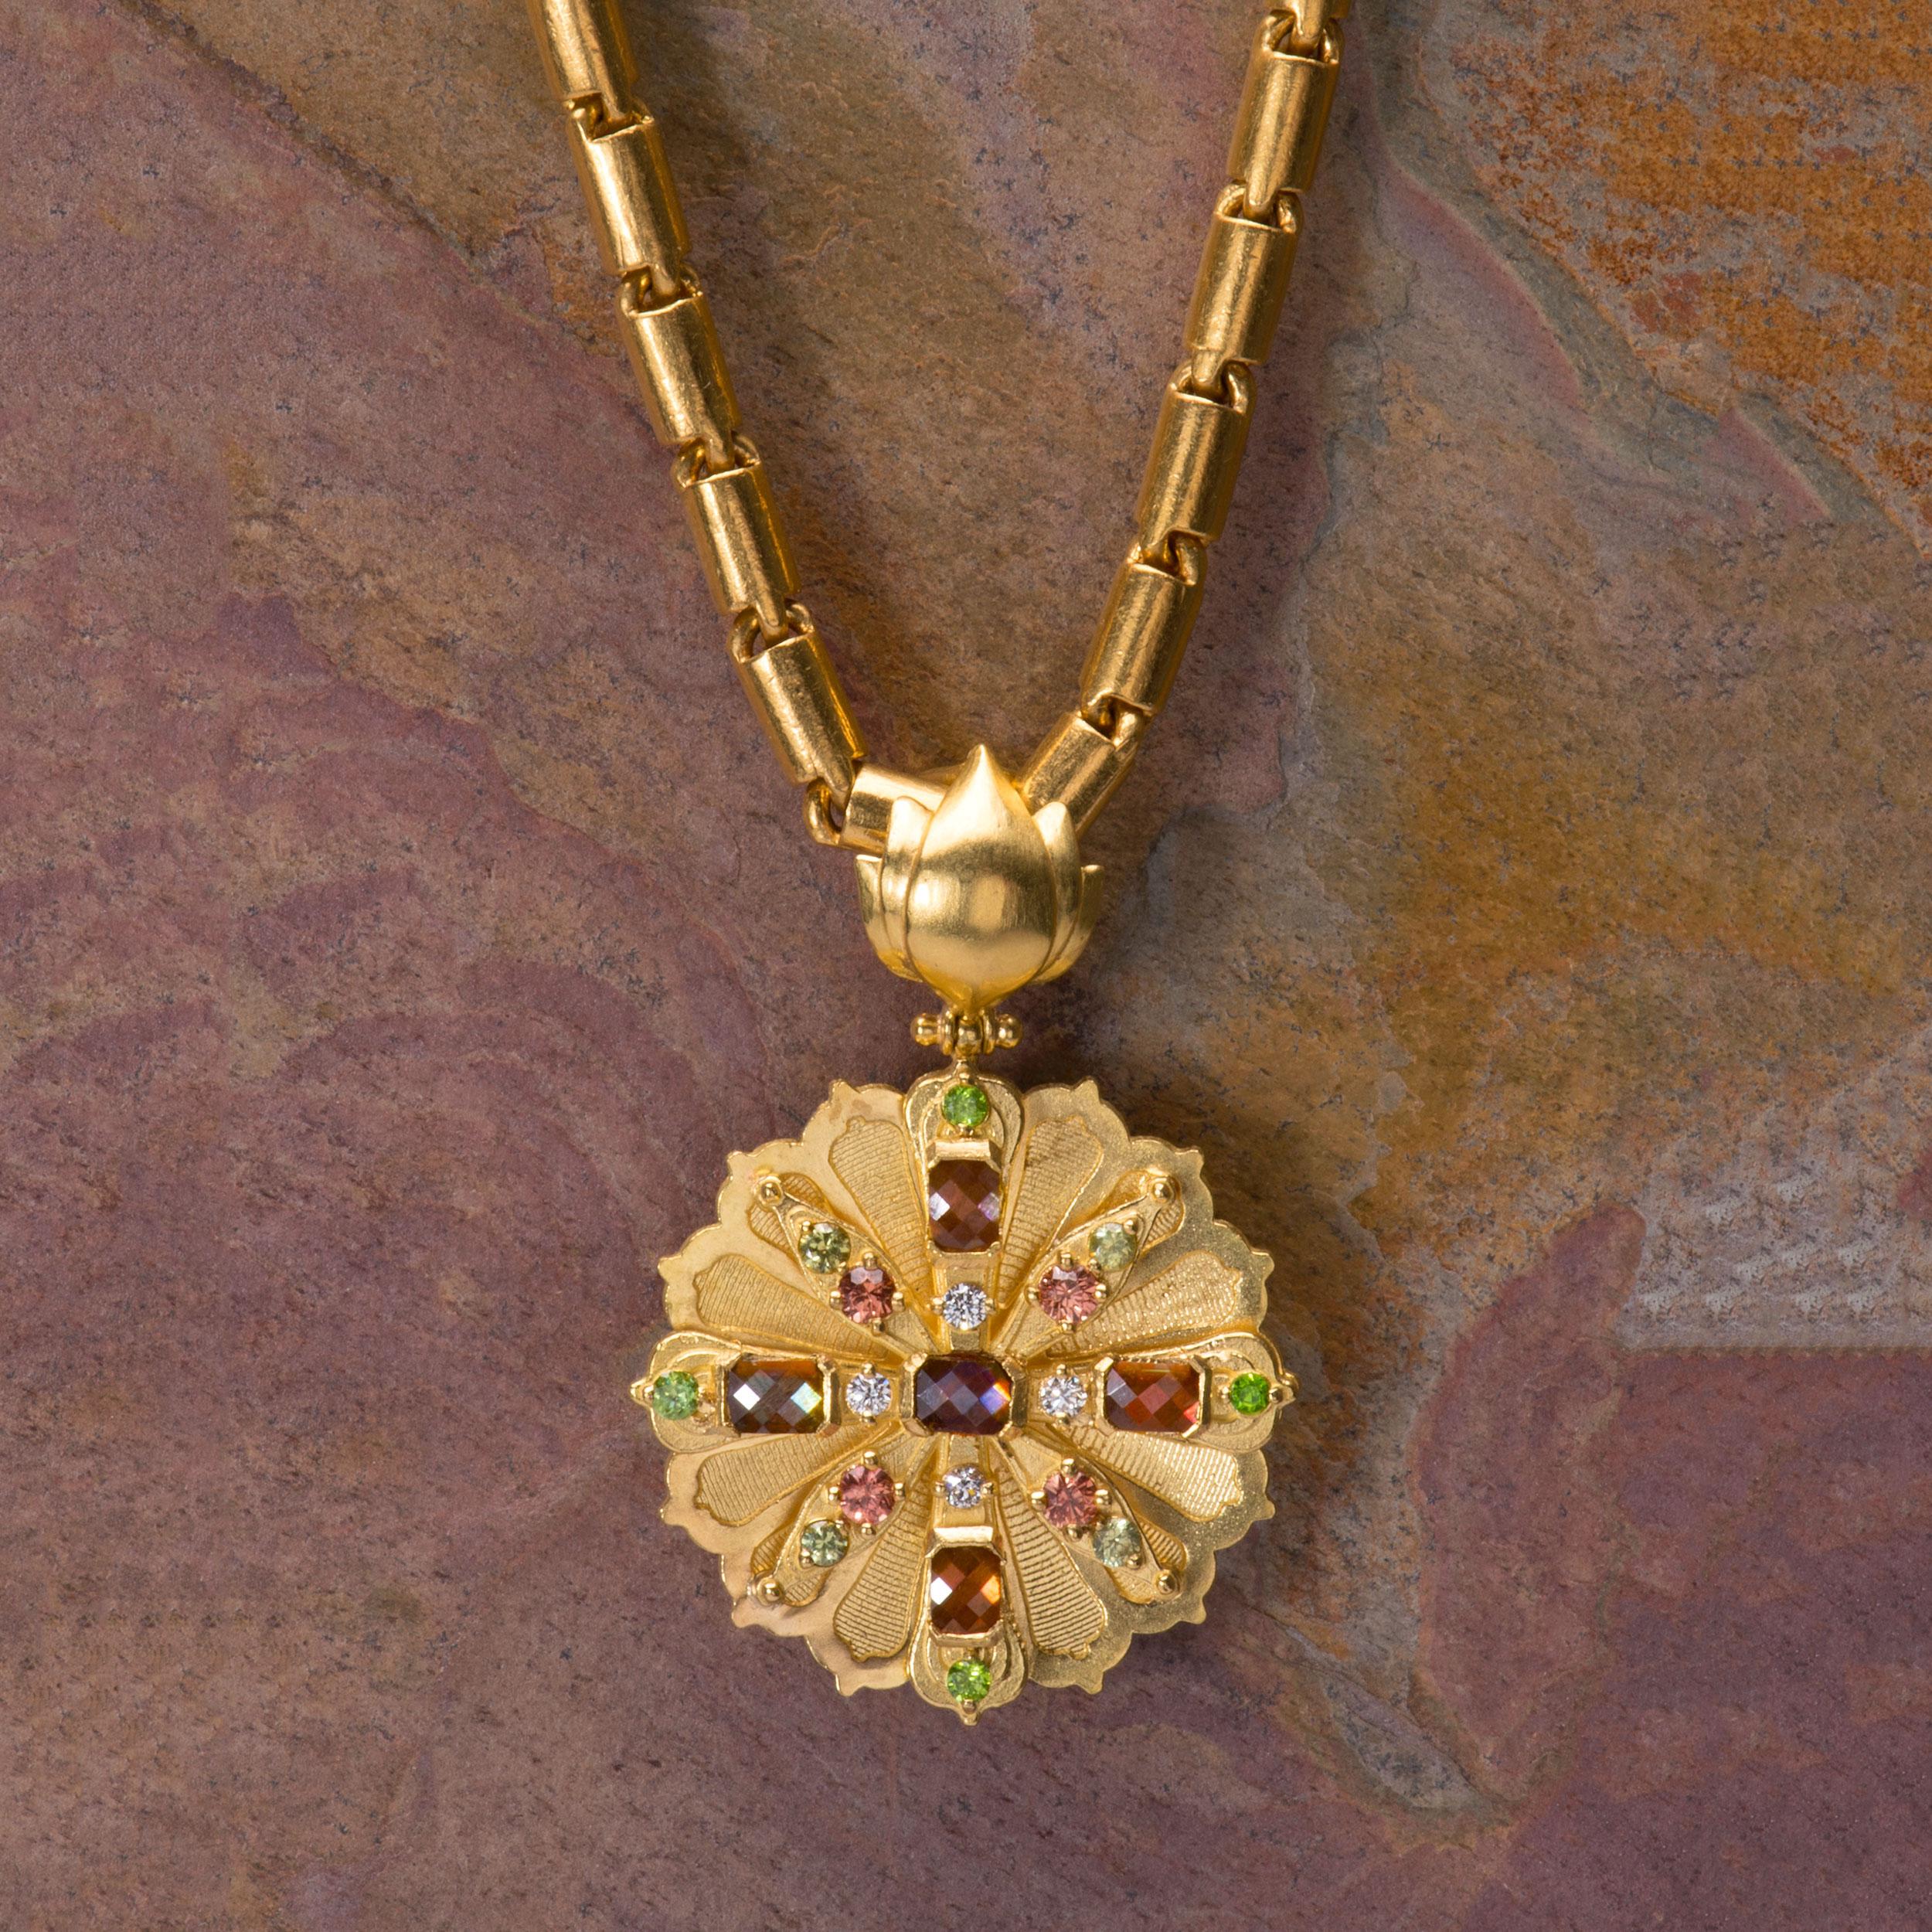 Star Lotus Andradite Garnet Pendant in 22 Karat Gold with Diamonds and Sapphires For Sale 1